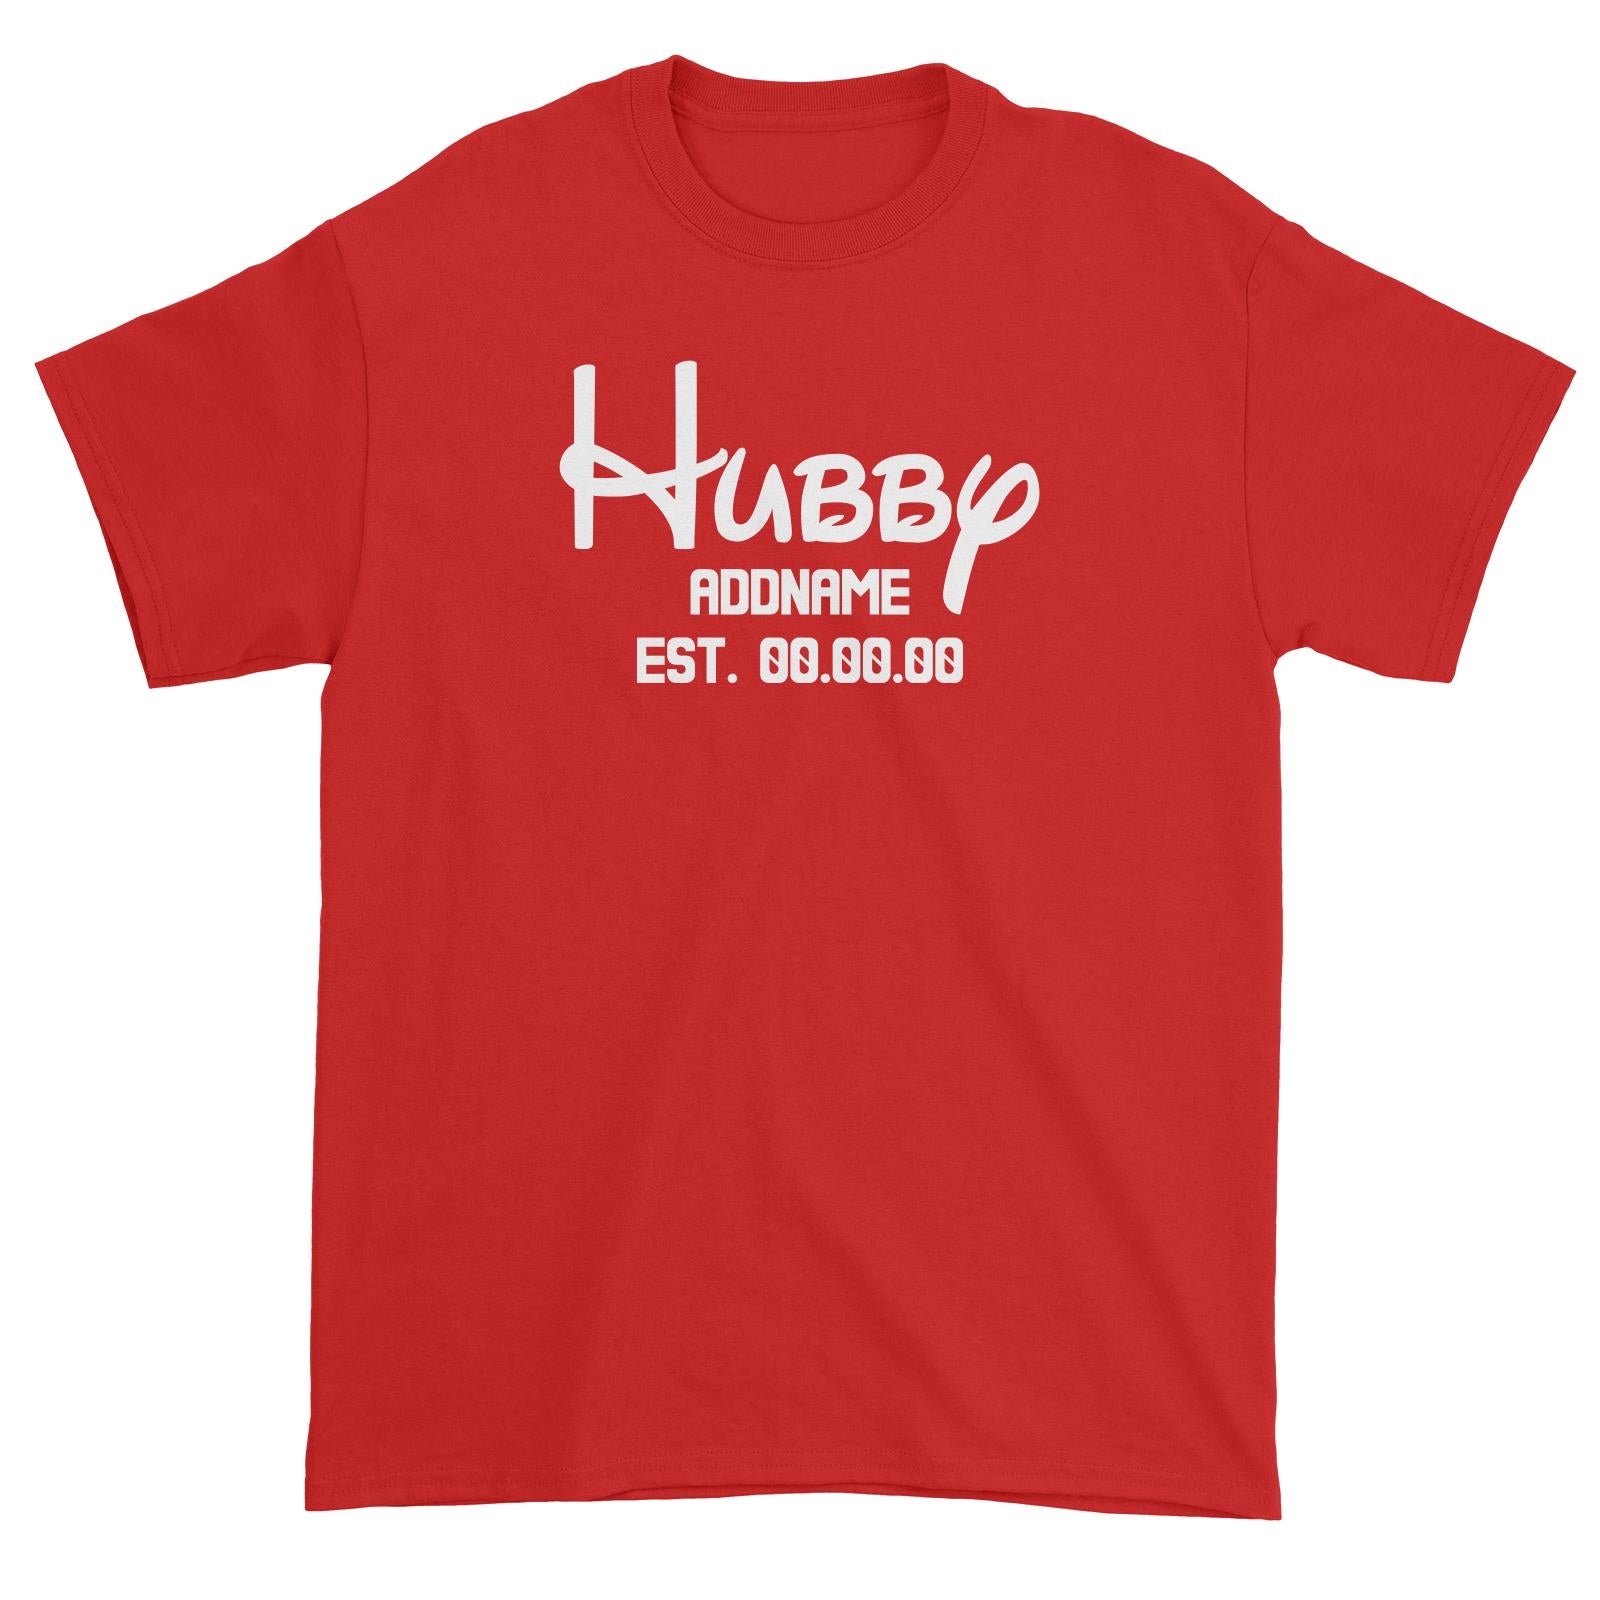 Husband and Wife Hubby Addname With Date Unisex T-Shirt